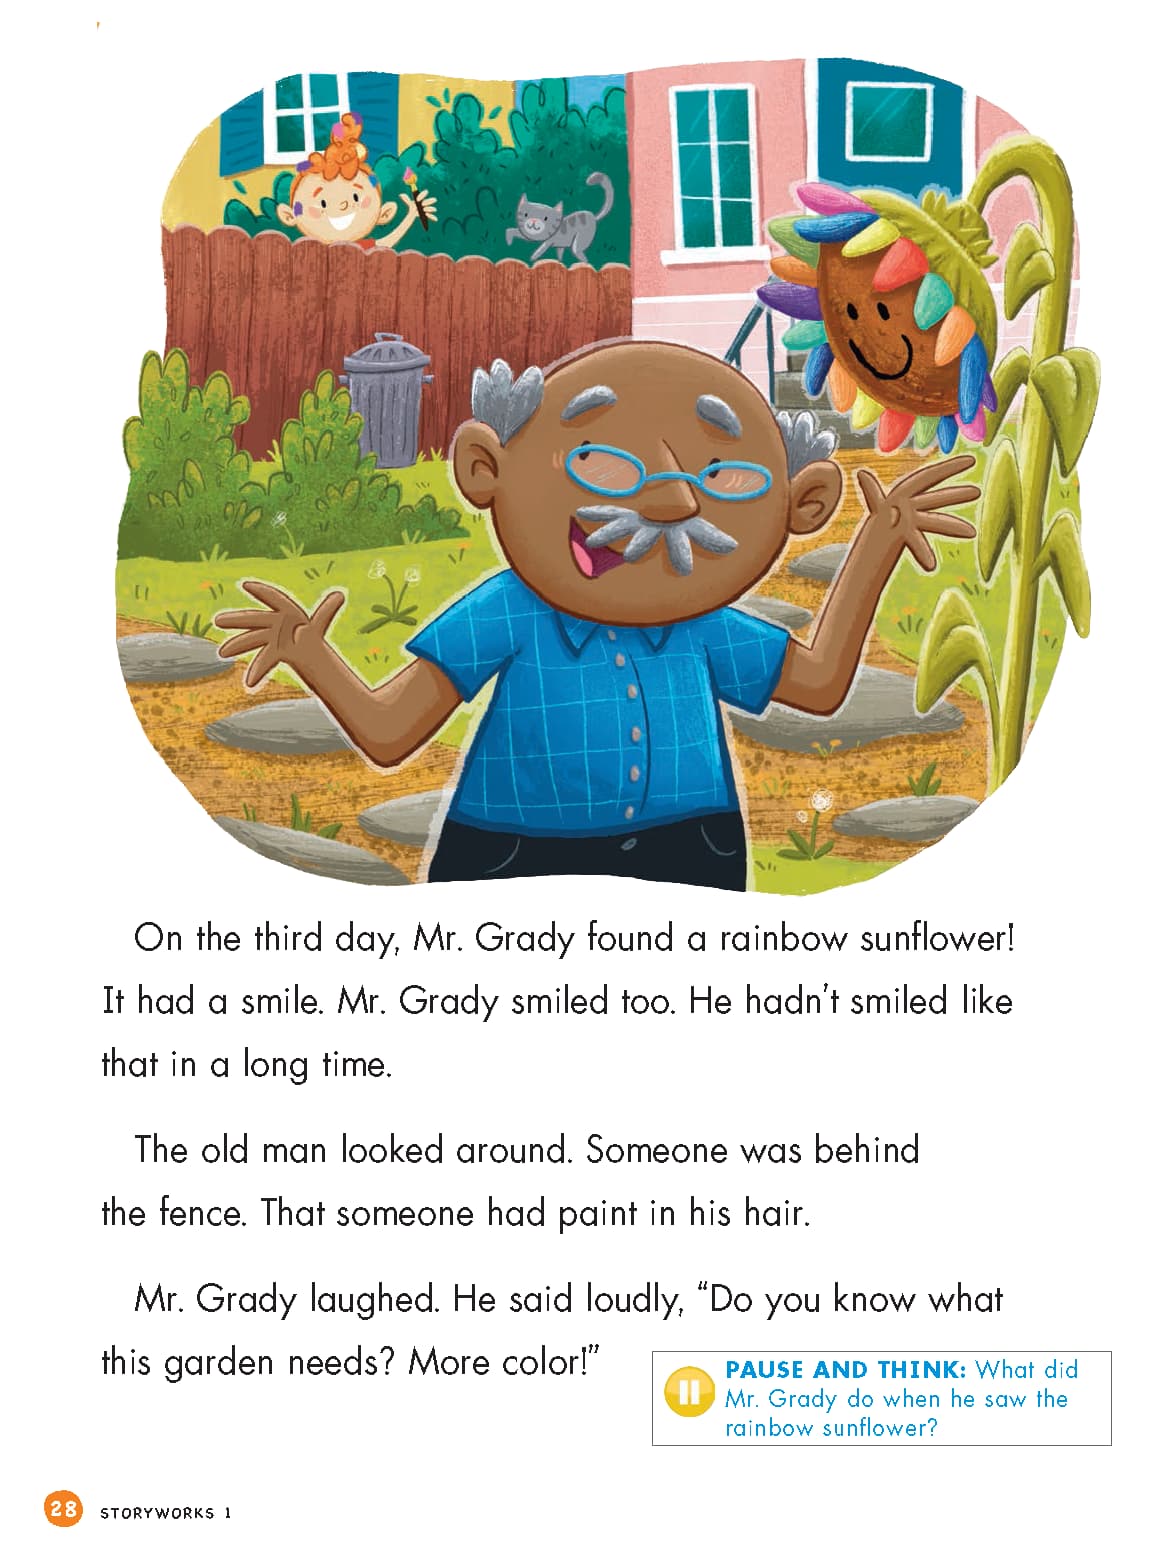  a sample page from an issue of Storyworks 1